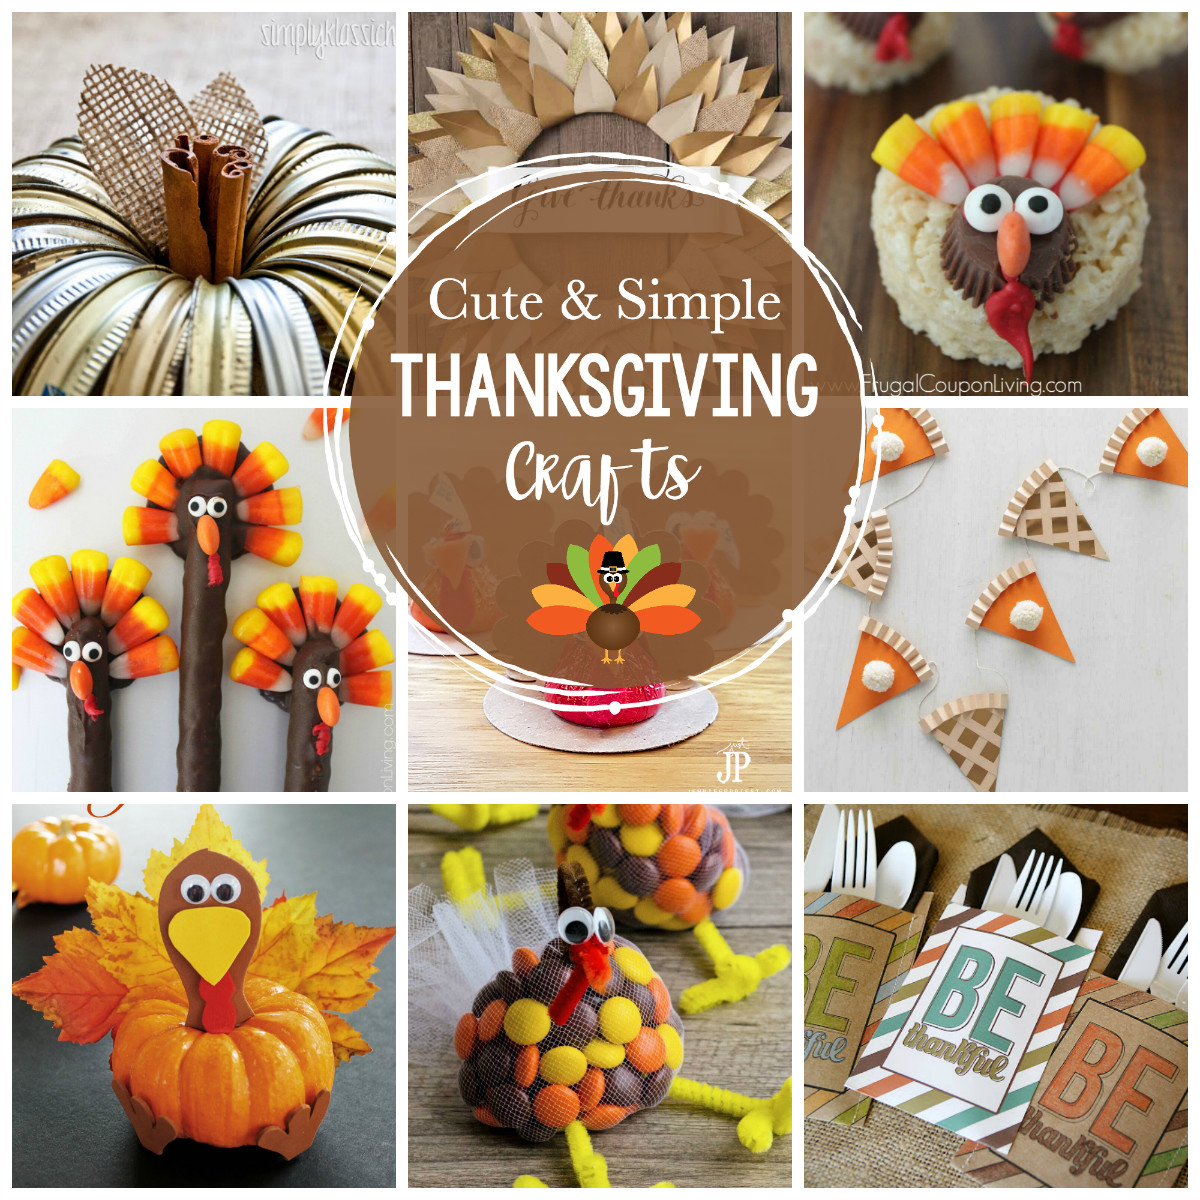 Crafts For Thanksgiving
 Fun & Simple Thanksgiving Crafts to Make This Year Crazy